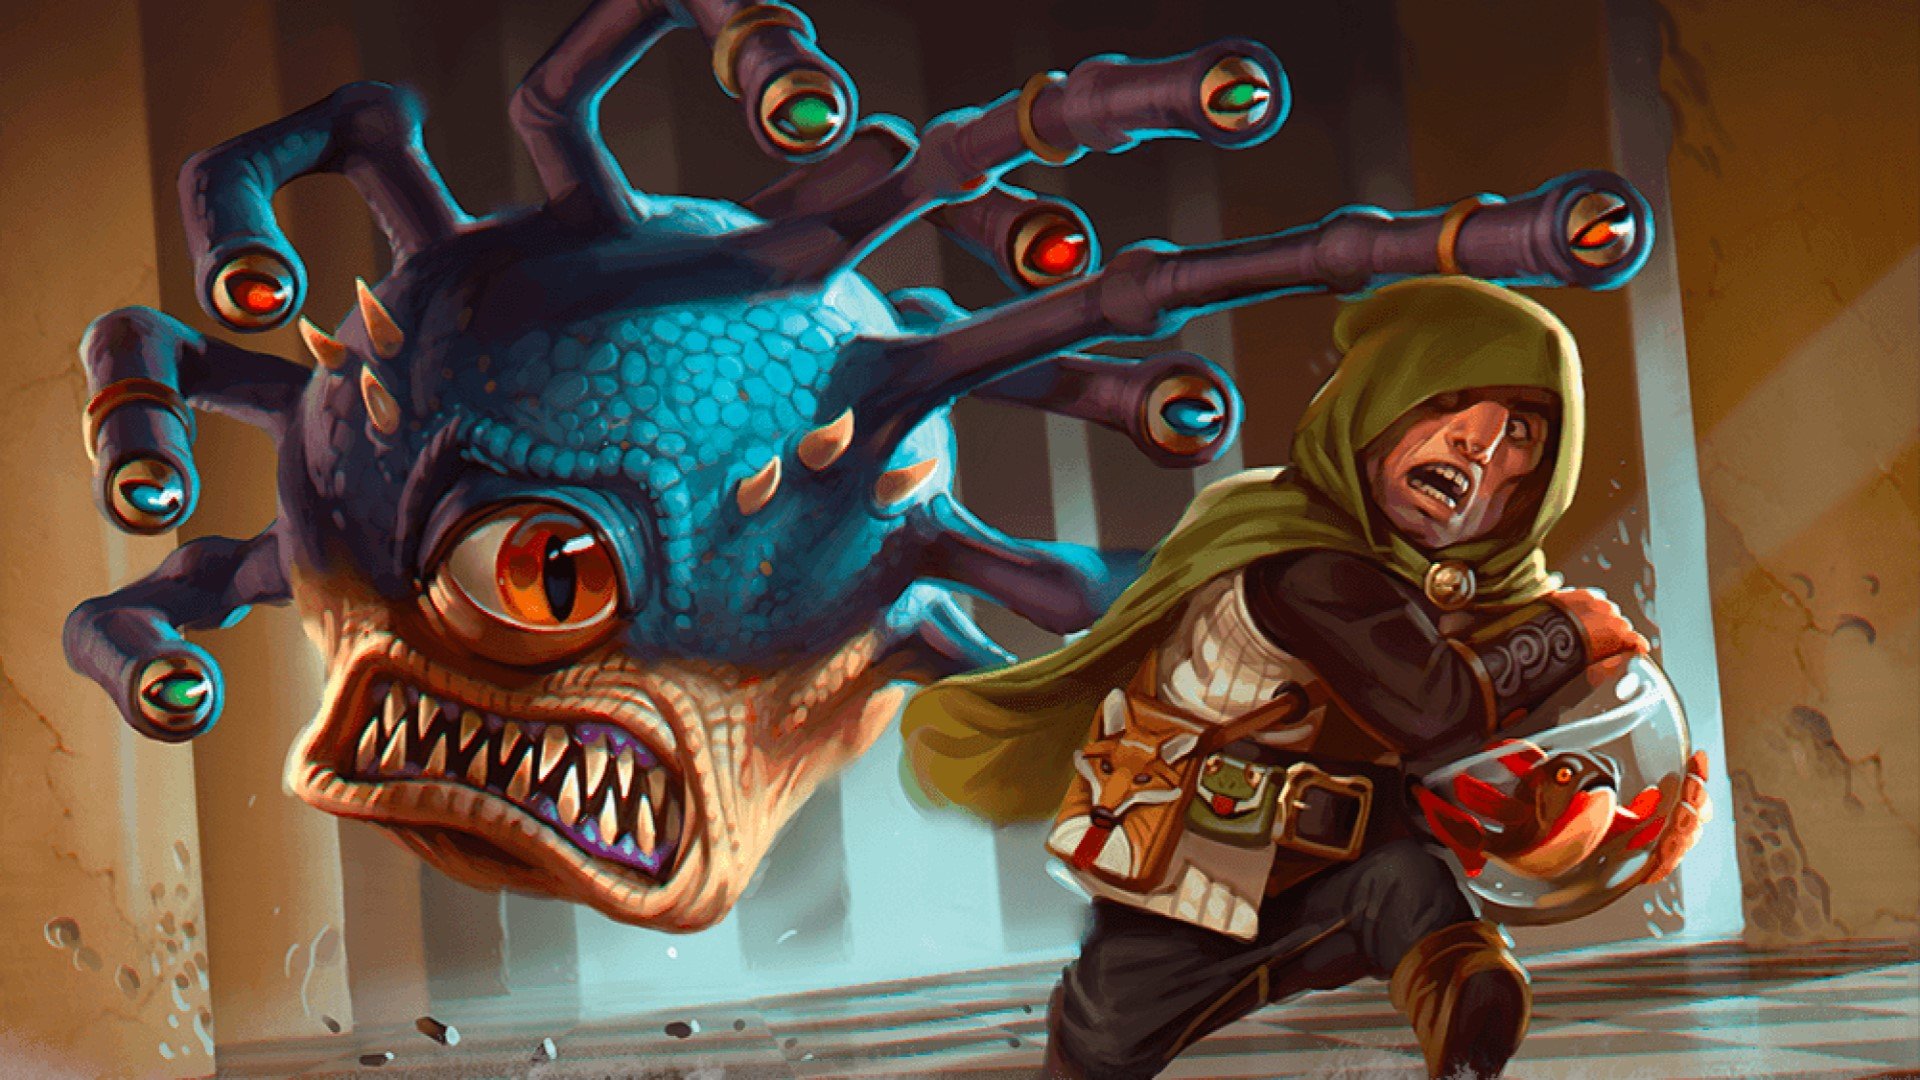 DnD Rogue 5e - Wizards of the Coast artwork showing a gnome thief running away from Xanathar the beholder